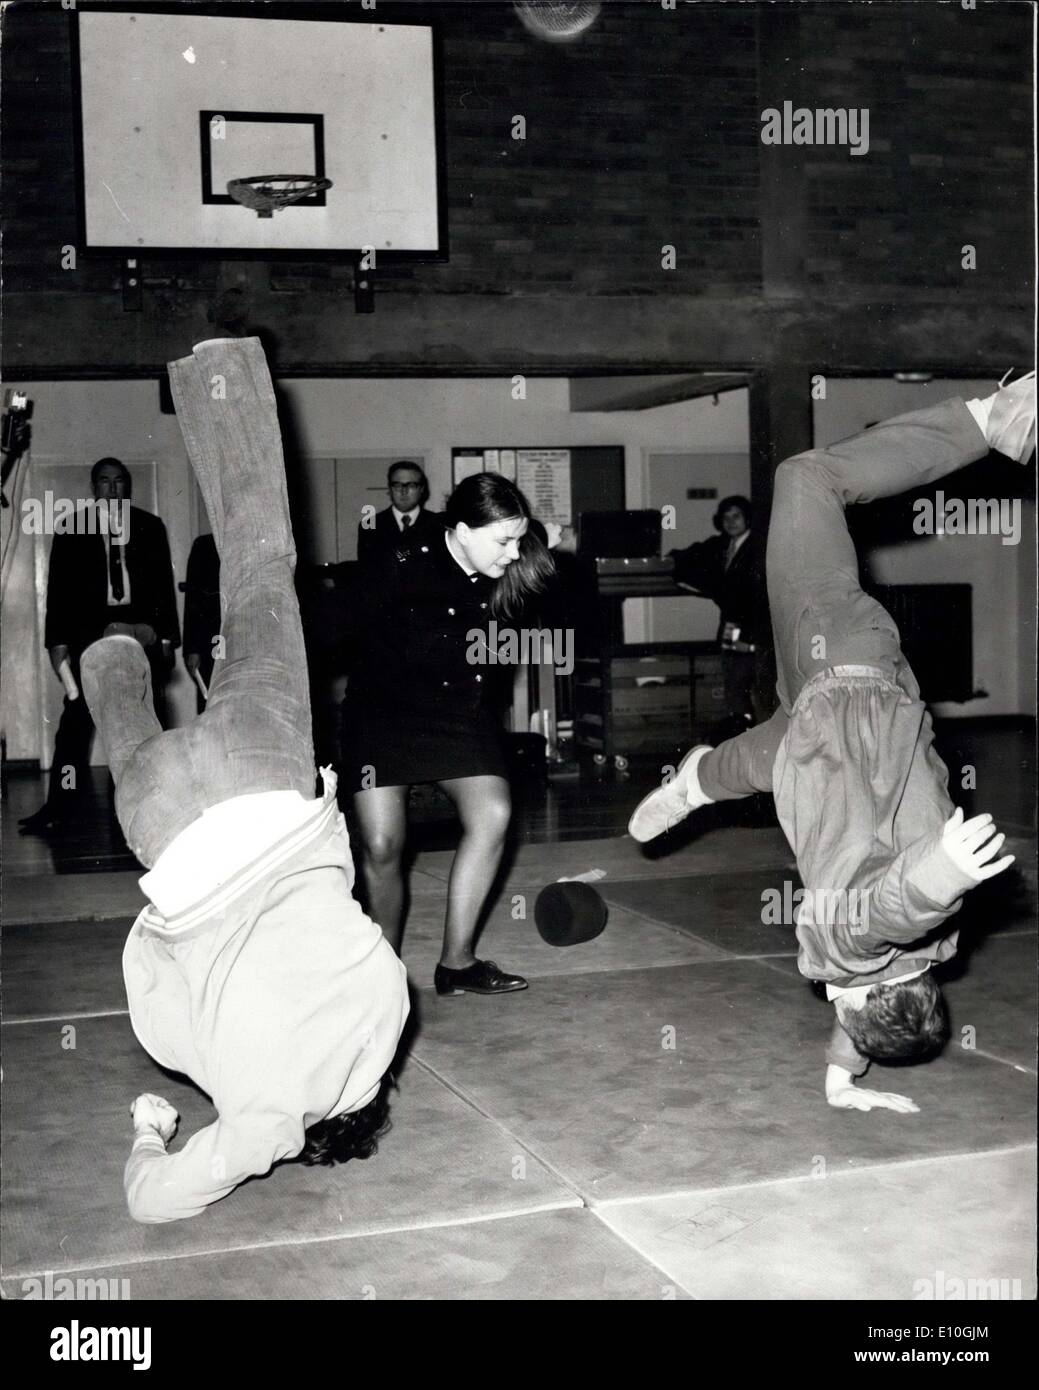 Jan. 08, 1973 - Metropolitan Police Women's Self-Defence Team Display: The Metropolitan Police Women's Self-Defence team display, was held today at Norwood Cadet Training Centre, Upper Norwood. Photo Shows: W.P.C. Theresa Goodhall, 25, of Bellshill, Lanarkshire, shows her skill in self-defense as she throws two men who attacked her, during the display today. Stock Photo